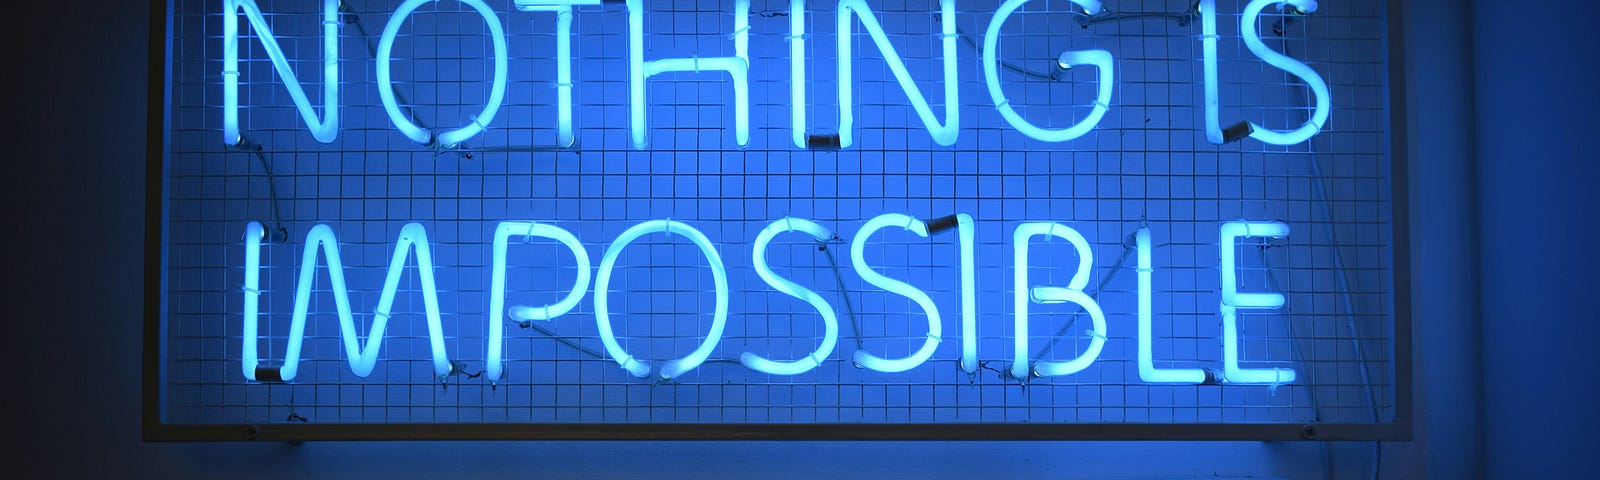 A blue neon sign reading “Nothing is Impossible”